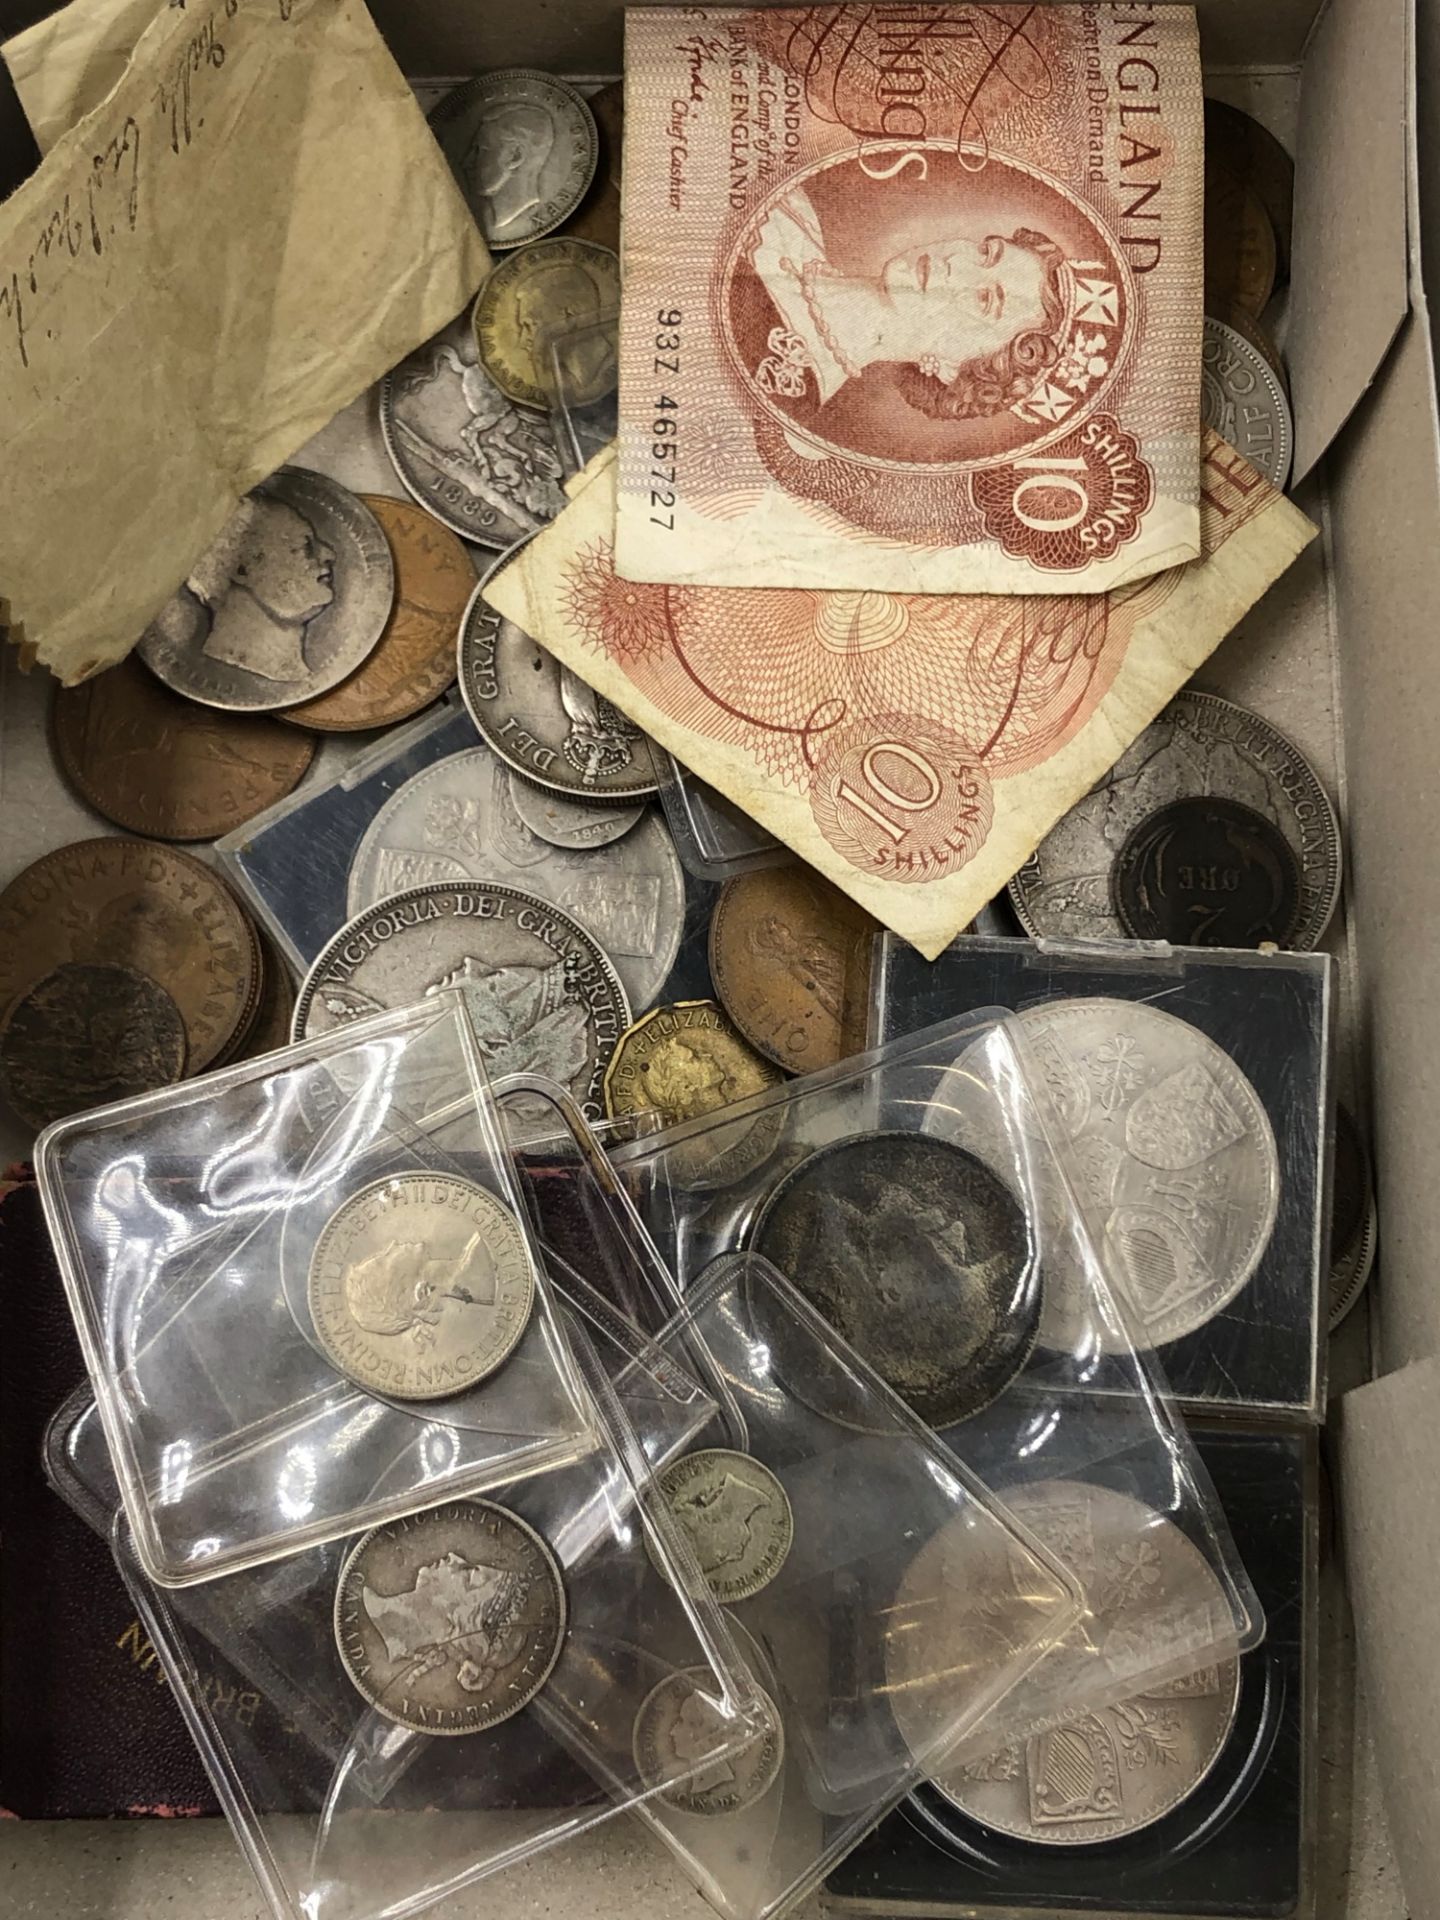 A COLLECTION OF ANTIQUE AND LATER COINS AND BANK NOTES DATED TO INCLUDE 1834, 1874, 1887 ETC.